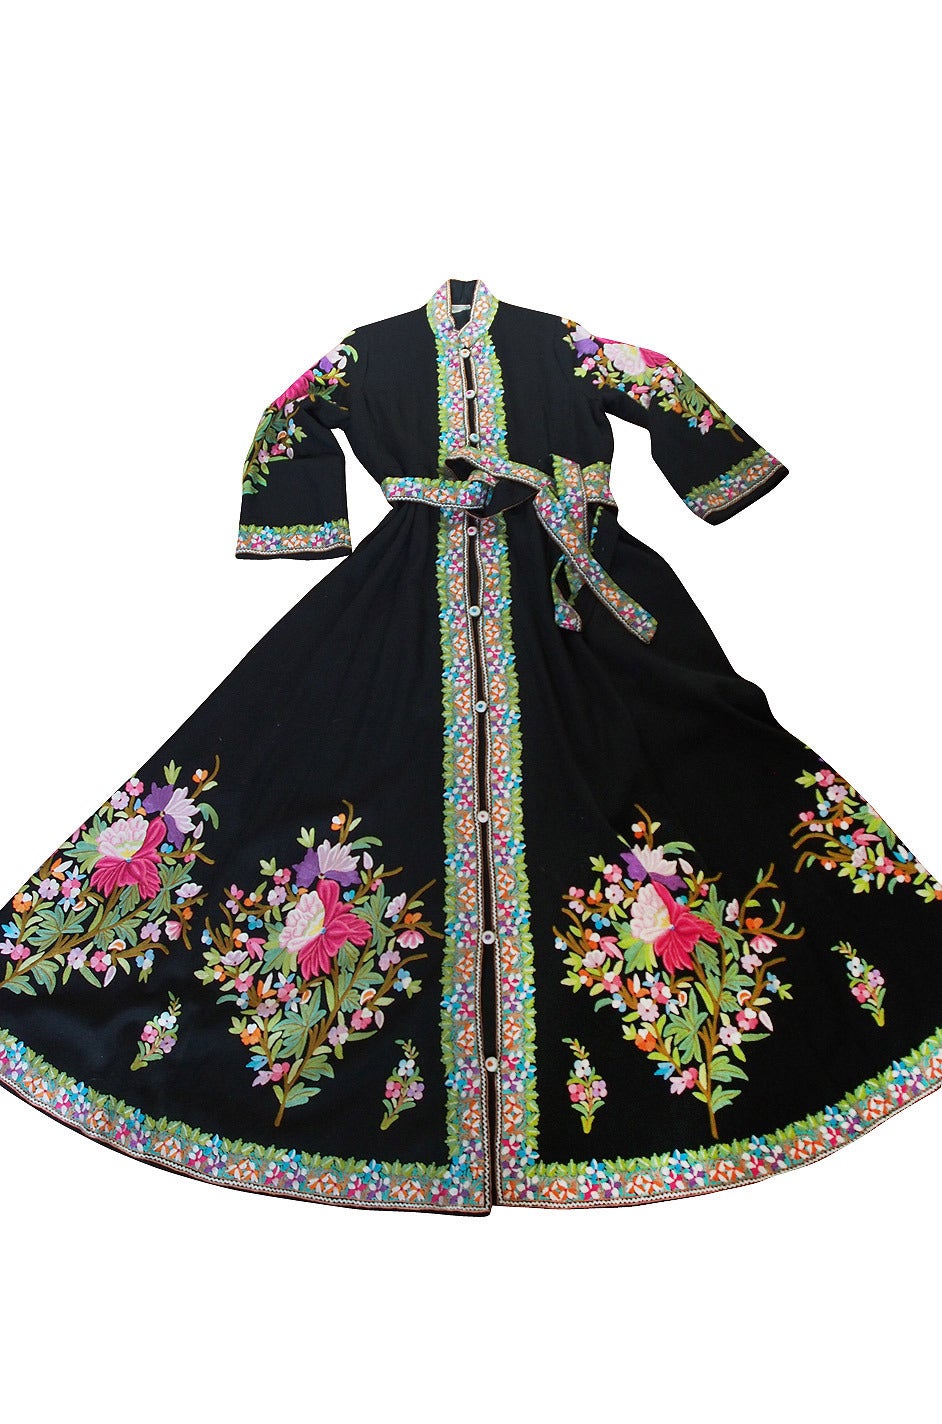 Exceptional Antique Hand Embroidered Coat or Gown 4